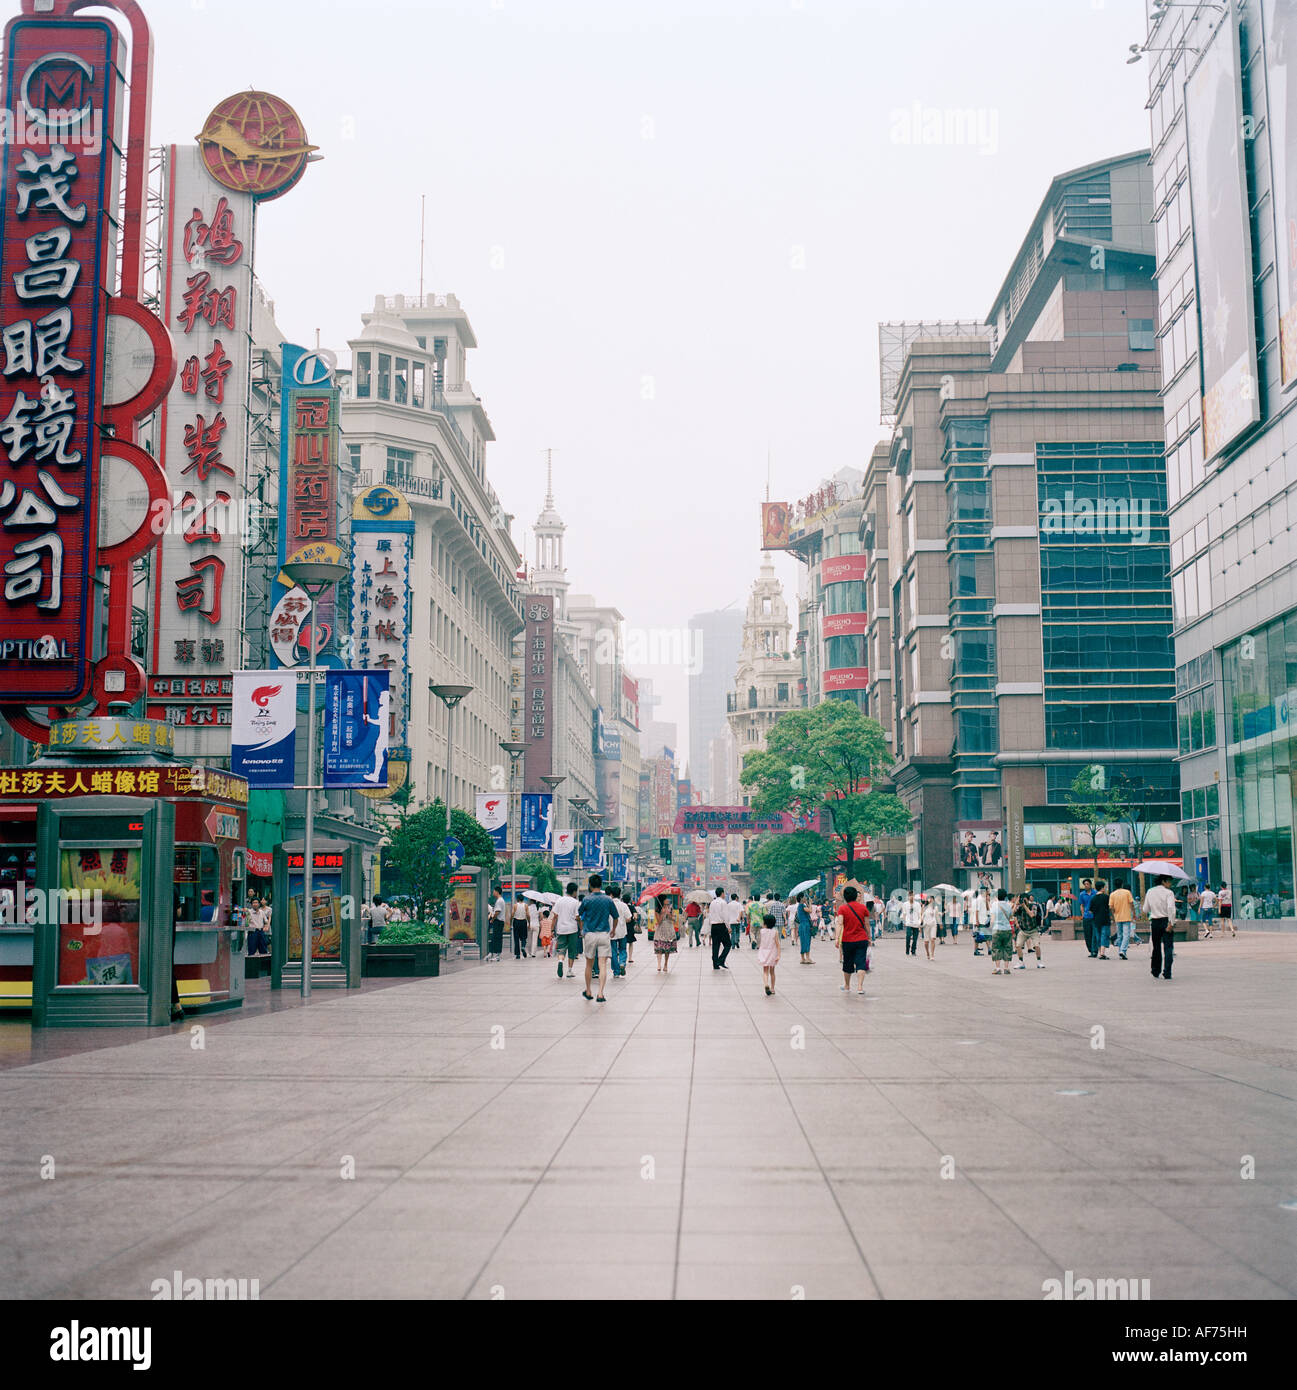 World Great Cities. Western shops and consumerism on Nanjing Road in the city of Shanghai in China in East Asia. Adventure Culture Travel Far East Stock Photo